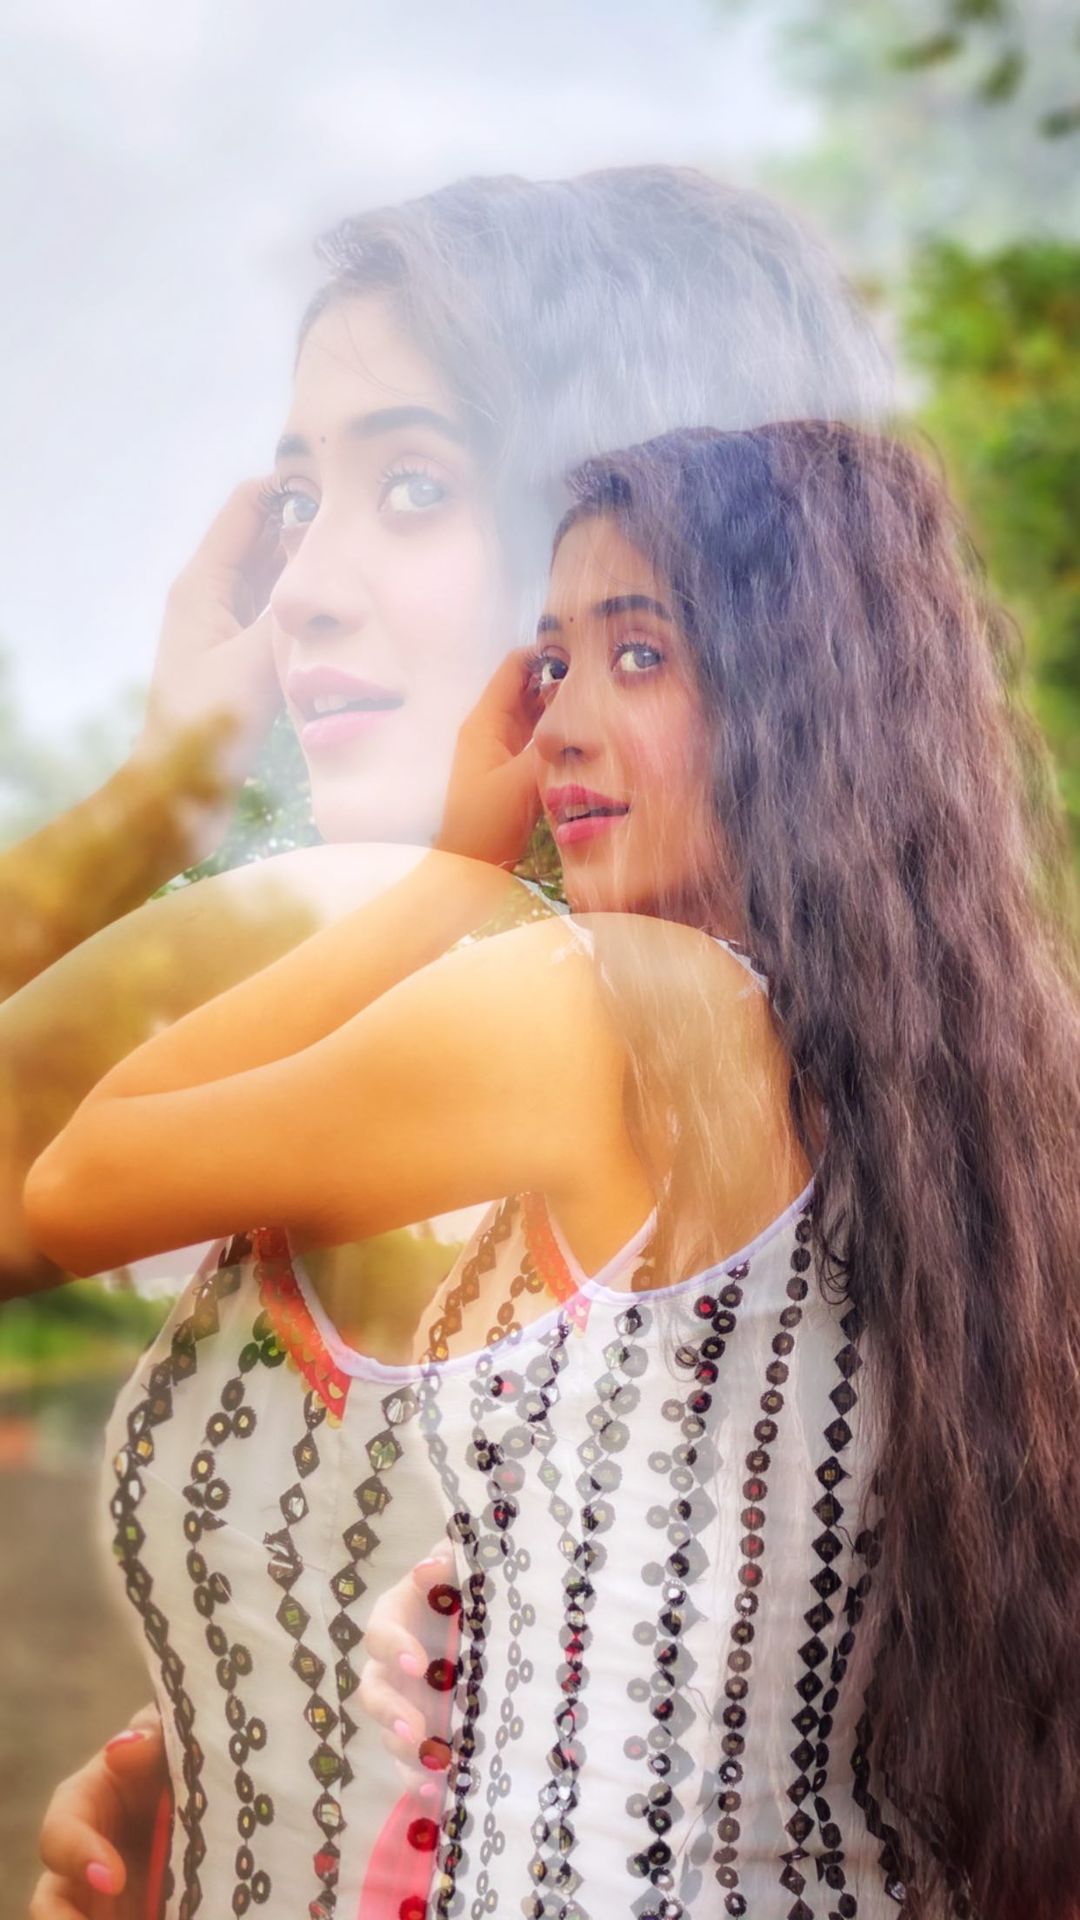 Pretty in red: Shivangi Joshi looks undeniably stunning in latest pictures